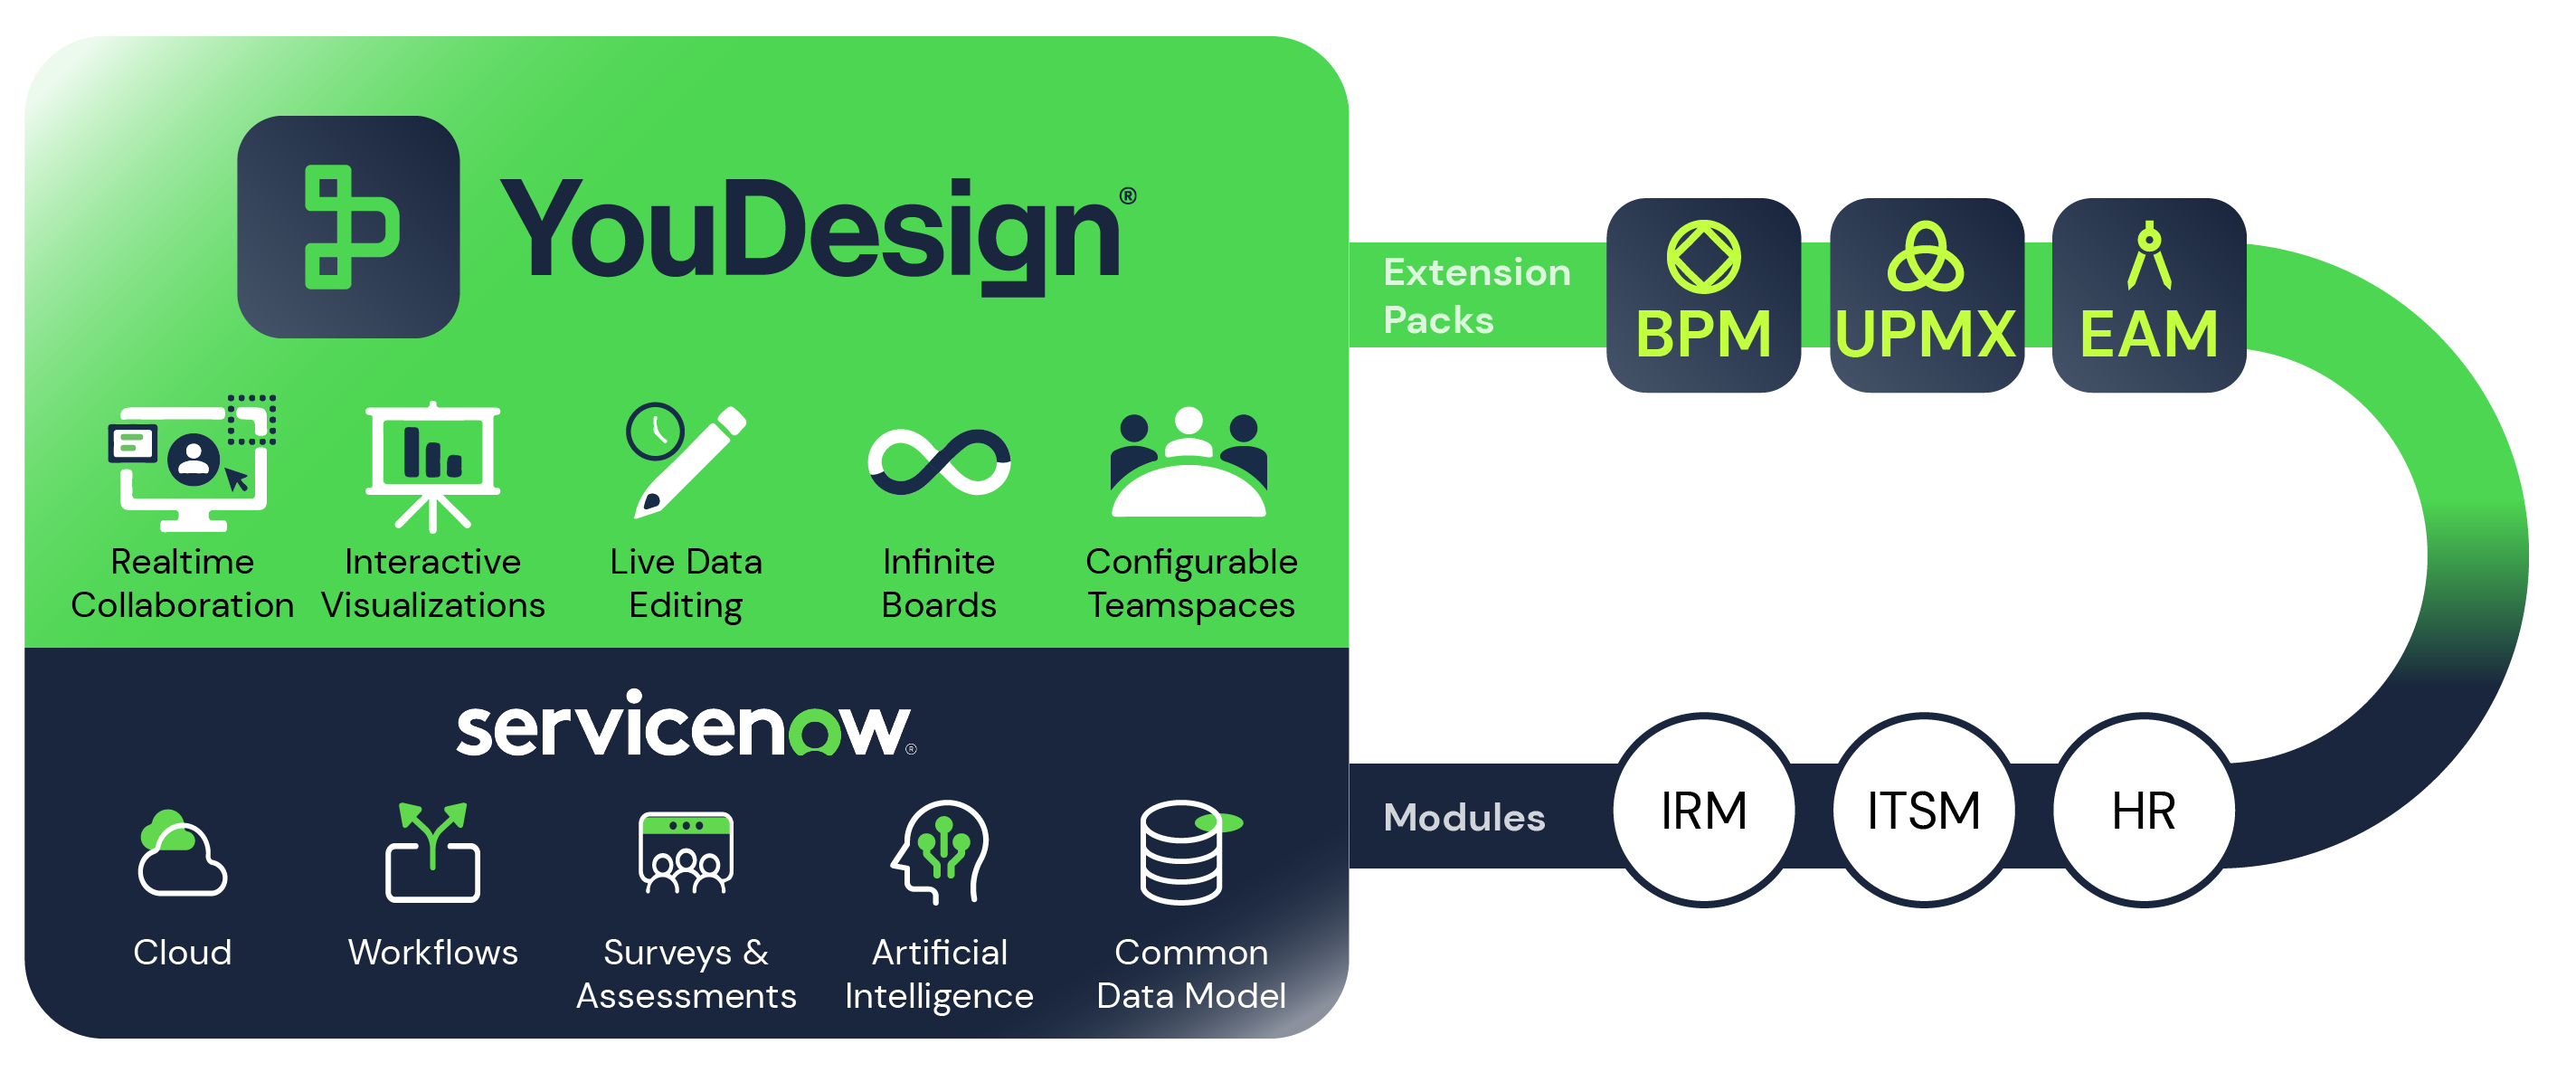 Press Release: Collaborate, Visualize, and Transform in ServiceNow with YouDesign